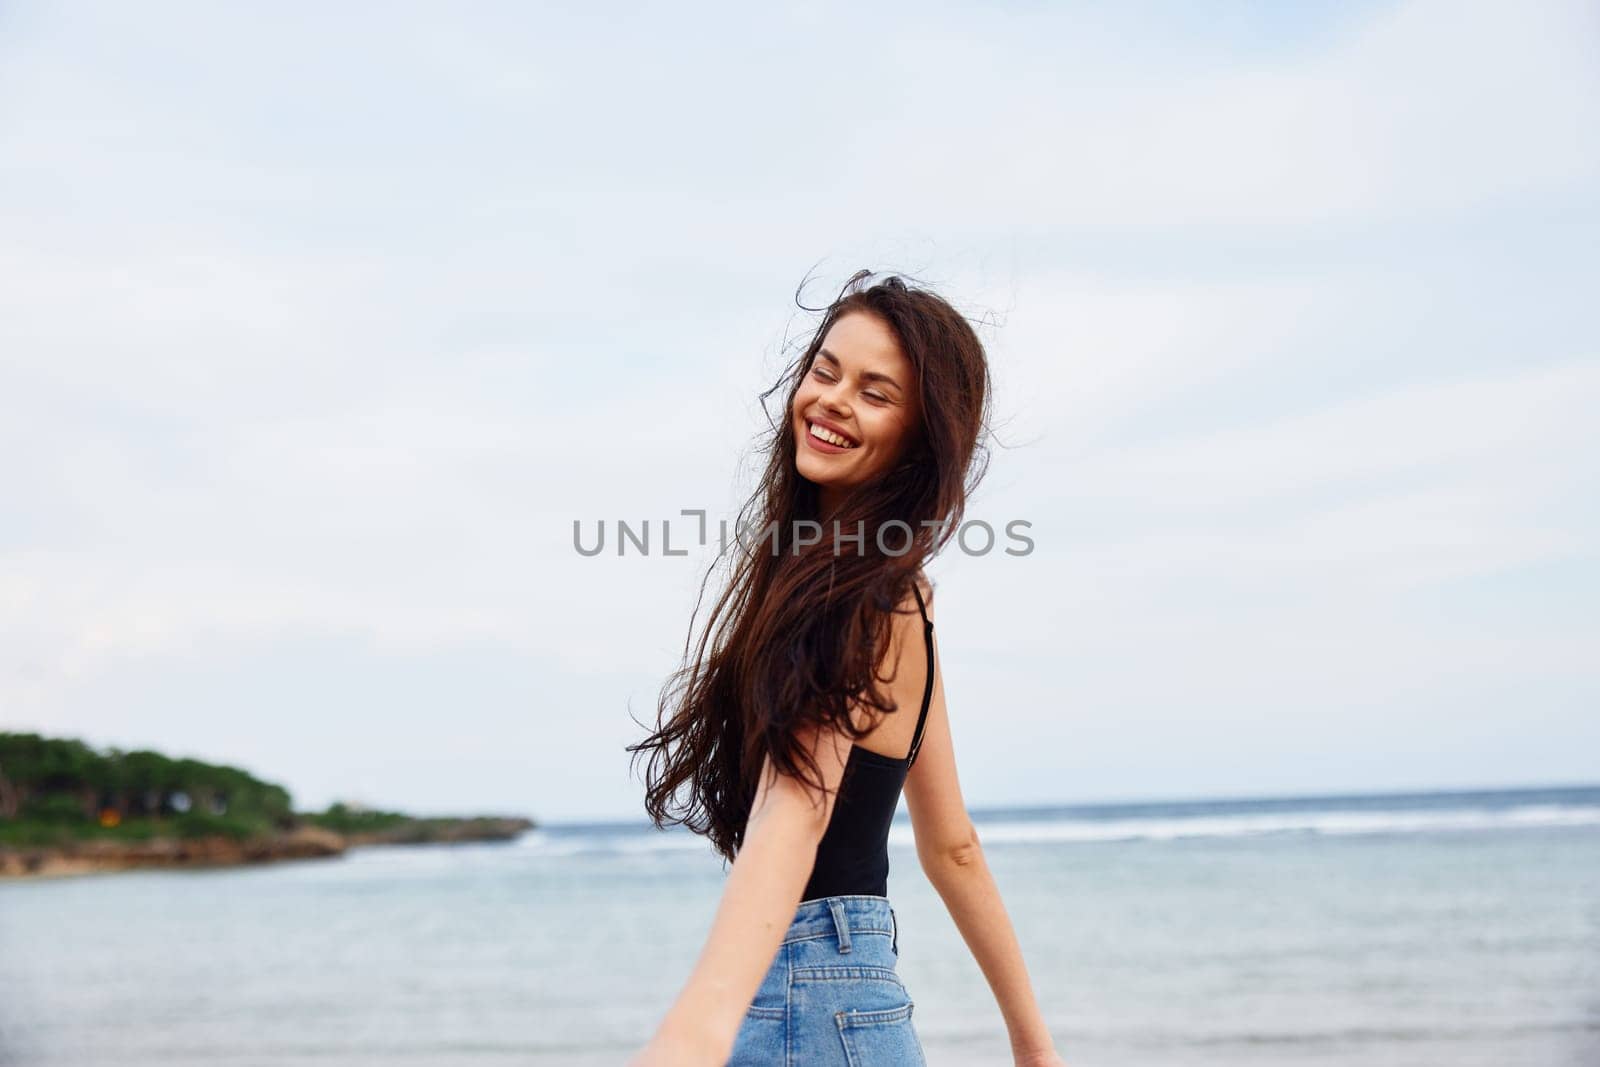 woman positive running freedom happiness beach sea body sunset long hair sunrise wave lifestyle tan smile carefree travel activity summer nature young